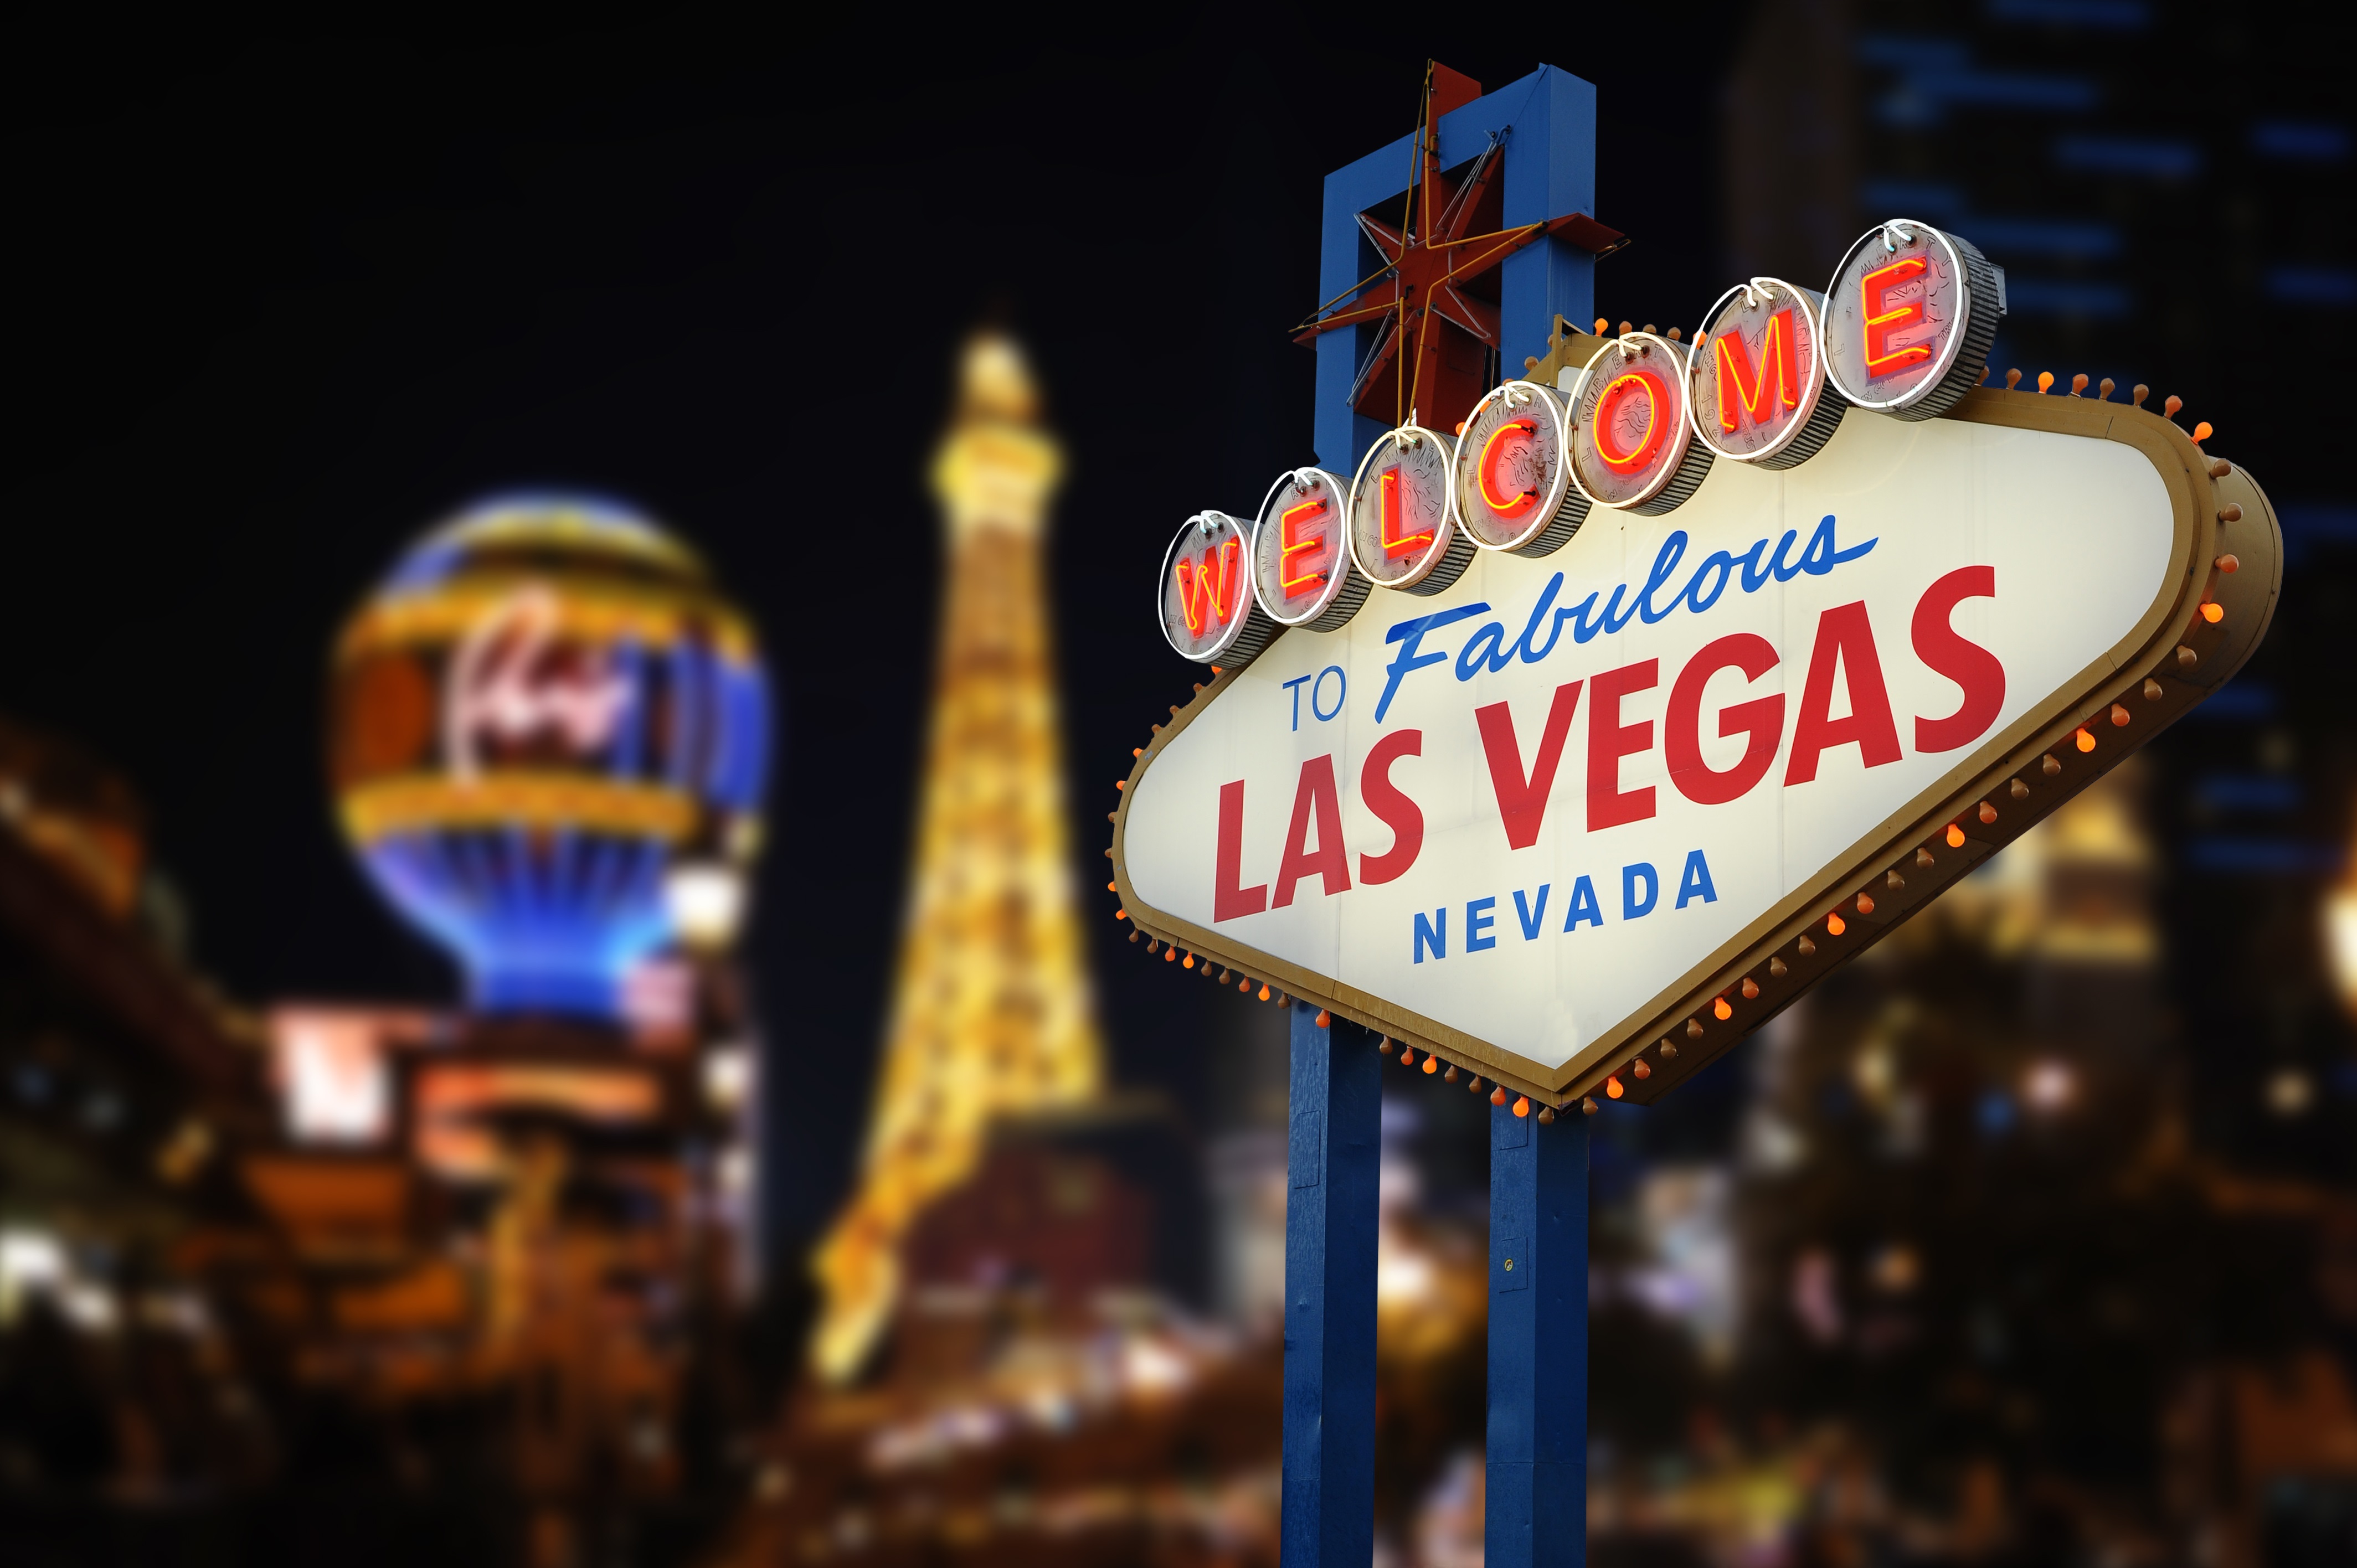 Join Nolan Business Solutions at SuiteWorld 2022 September 27th - 30th in Las Vegas